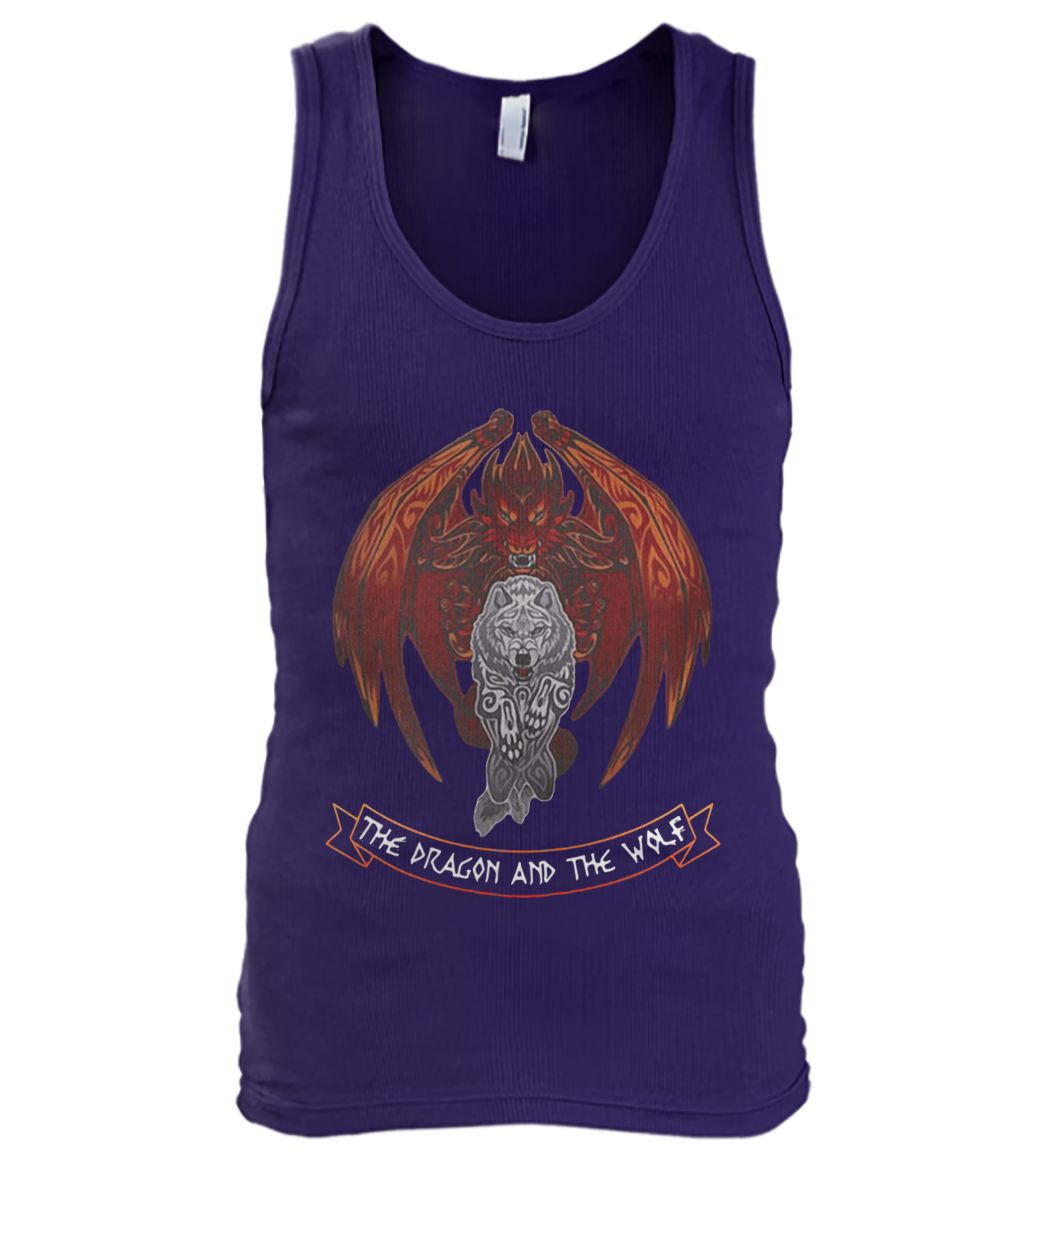 Game of thrones the dragon and the wolf men's tank top